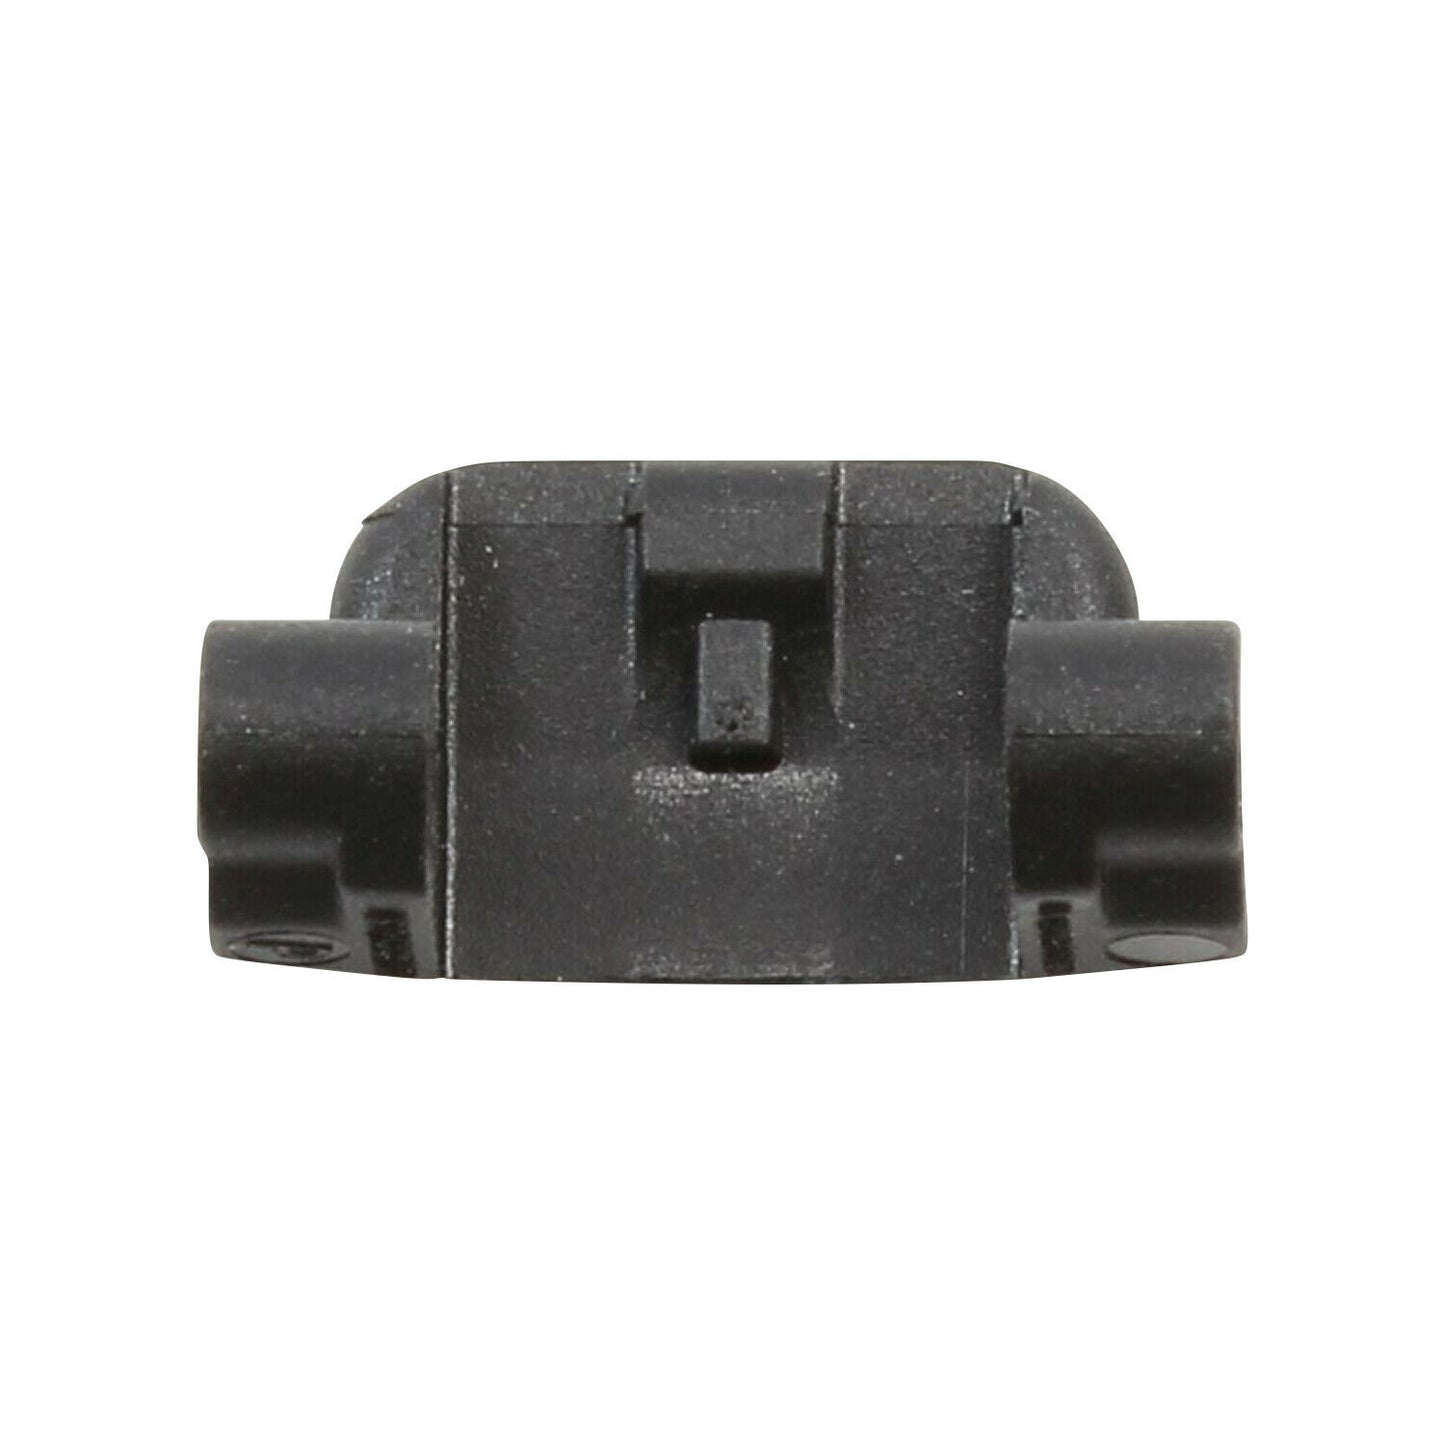 Blum 70T3553 Hinge Opening Angle Restriction Clip